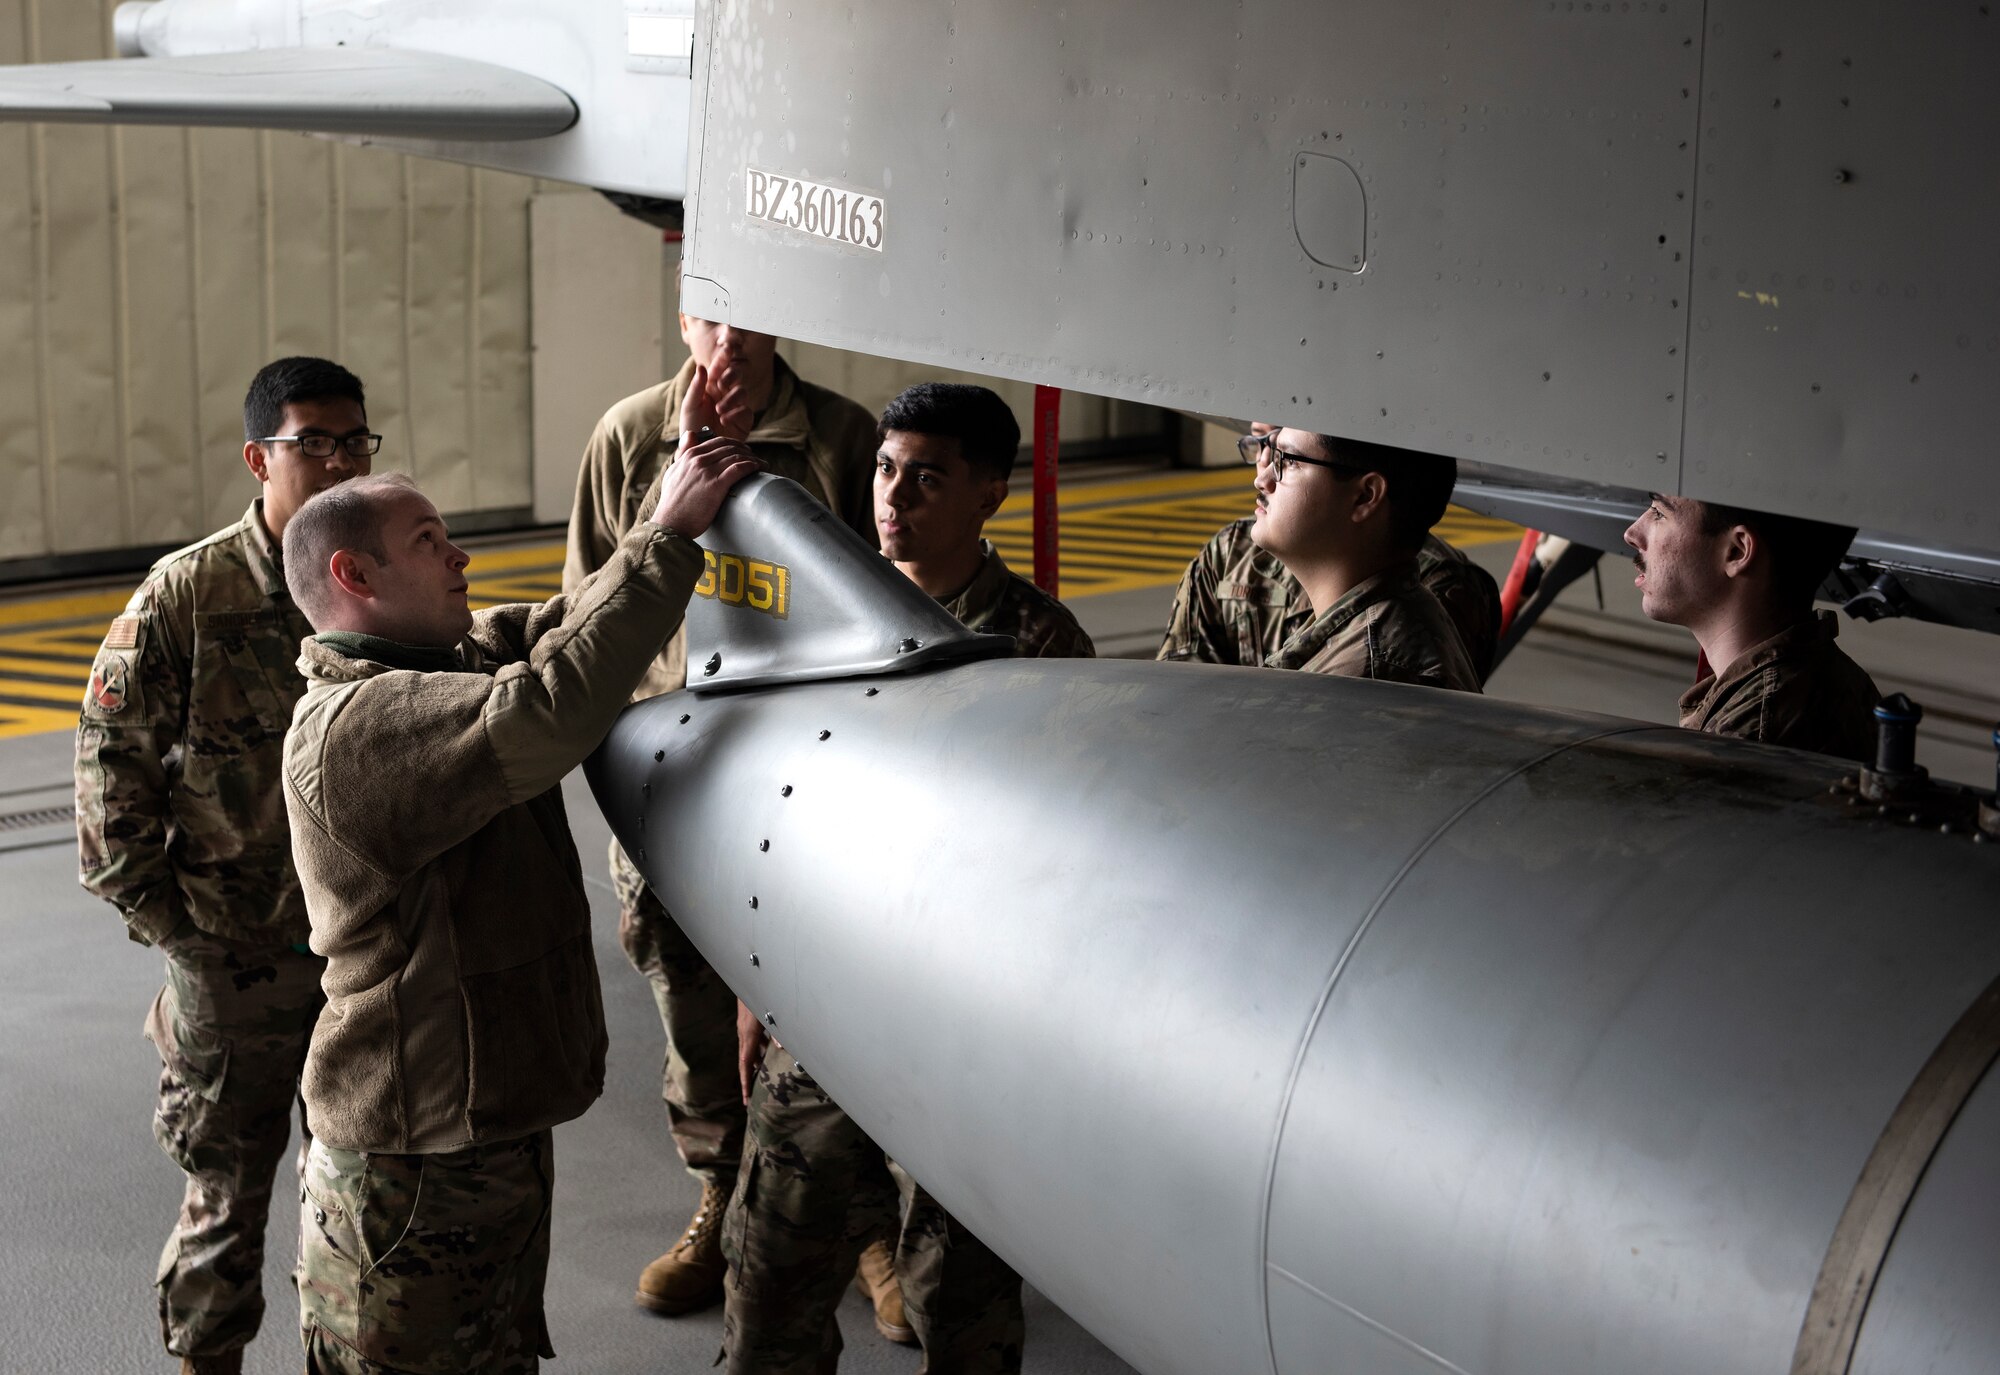 U.S. Air Force Airmen, assigned to the 48th Component Maintenance Squadron fuels systems maintenance shop, learn how to attach an external fuel tank to an F-15C Eagle during an Agile Combat Employment training at Royal Air Force Lakenheath, England, Aug. 31, 2020. The training was designed to enhance ACE  capabilities by teaching Airmen to perform multiple roles outside the scope of their regular daily duties. (U.S. Air Force photo by Airman 1st Class Jessi Monte)